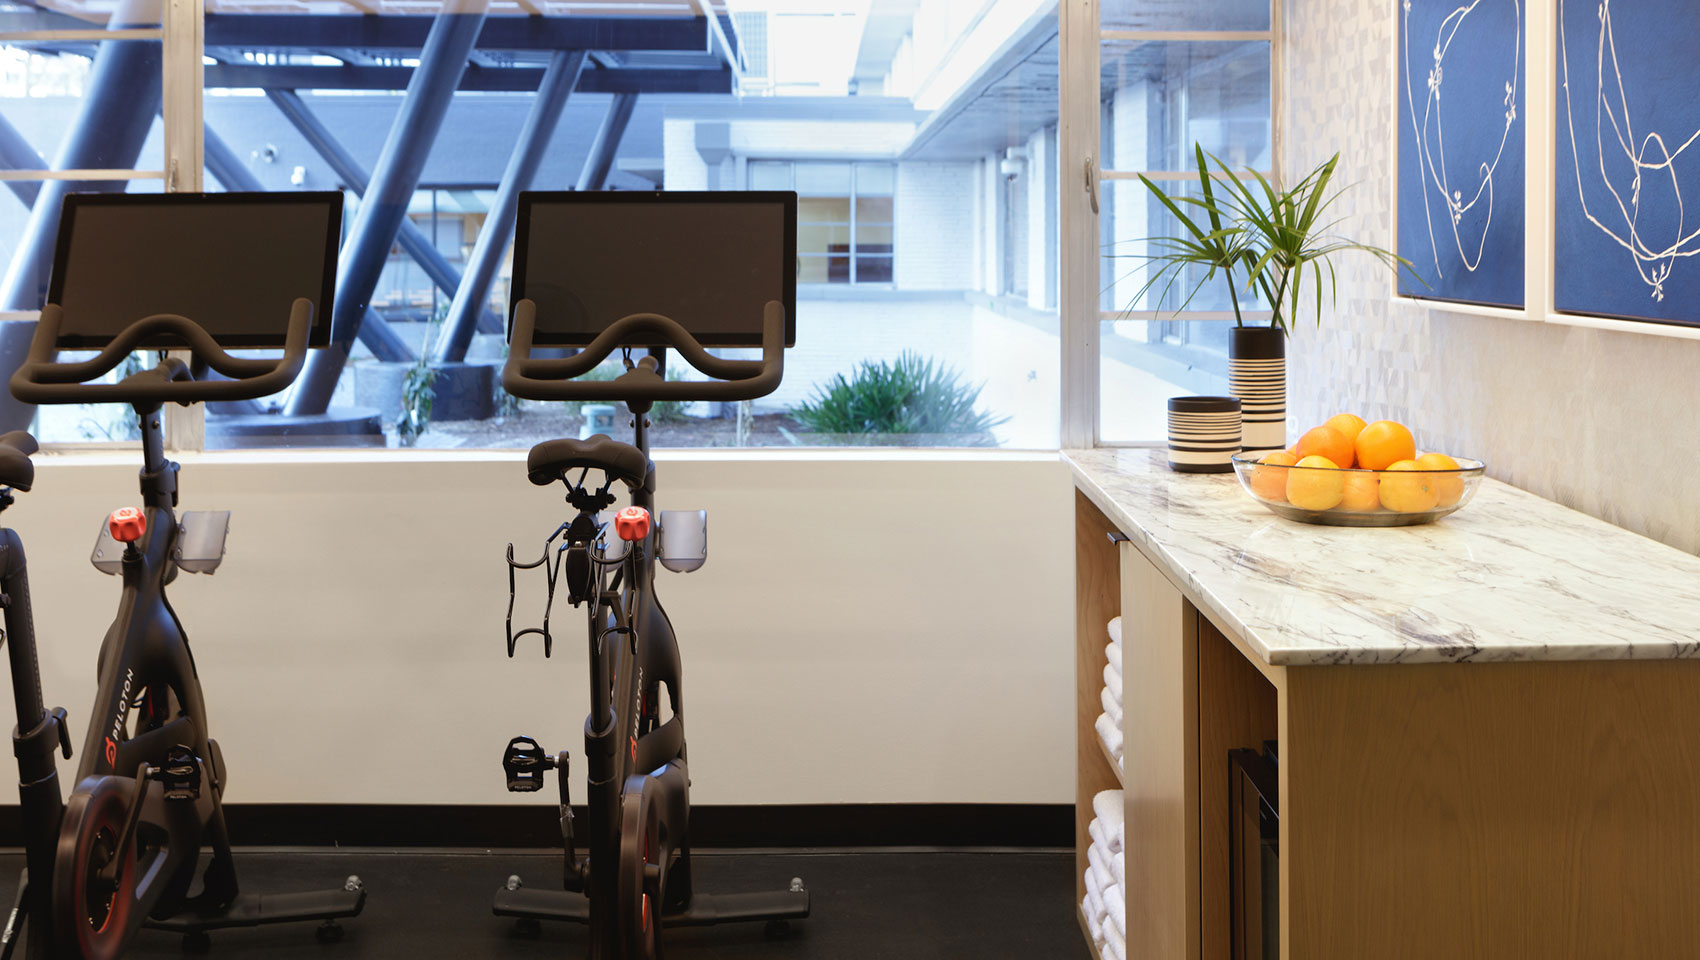 fitness center with peloton bike and large window looking outside